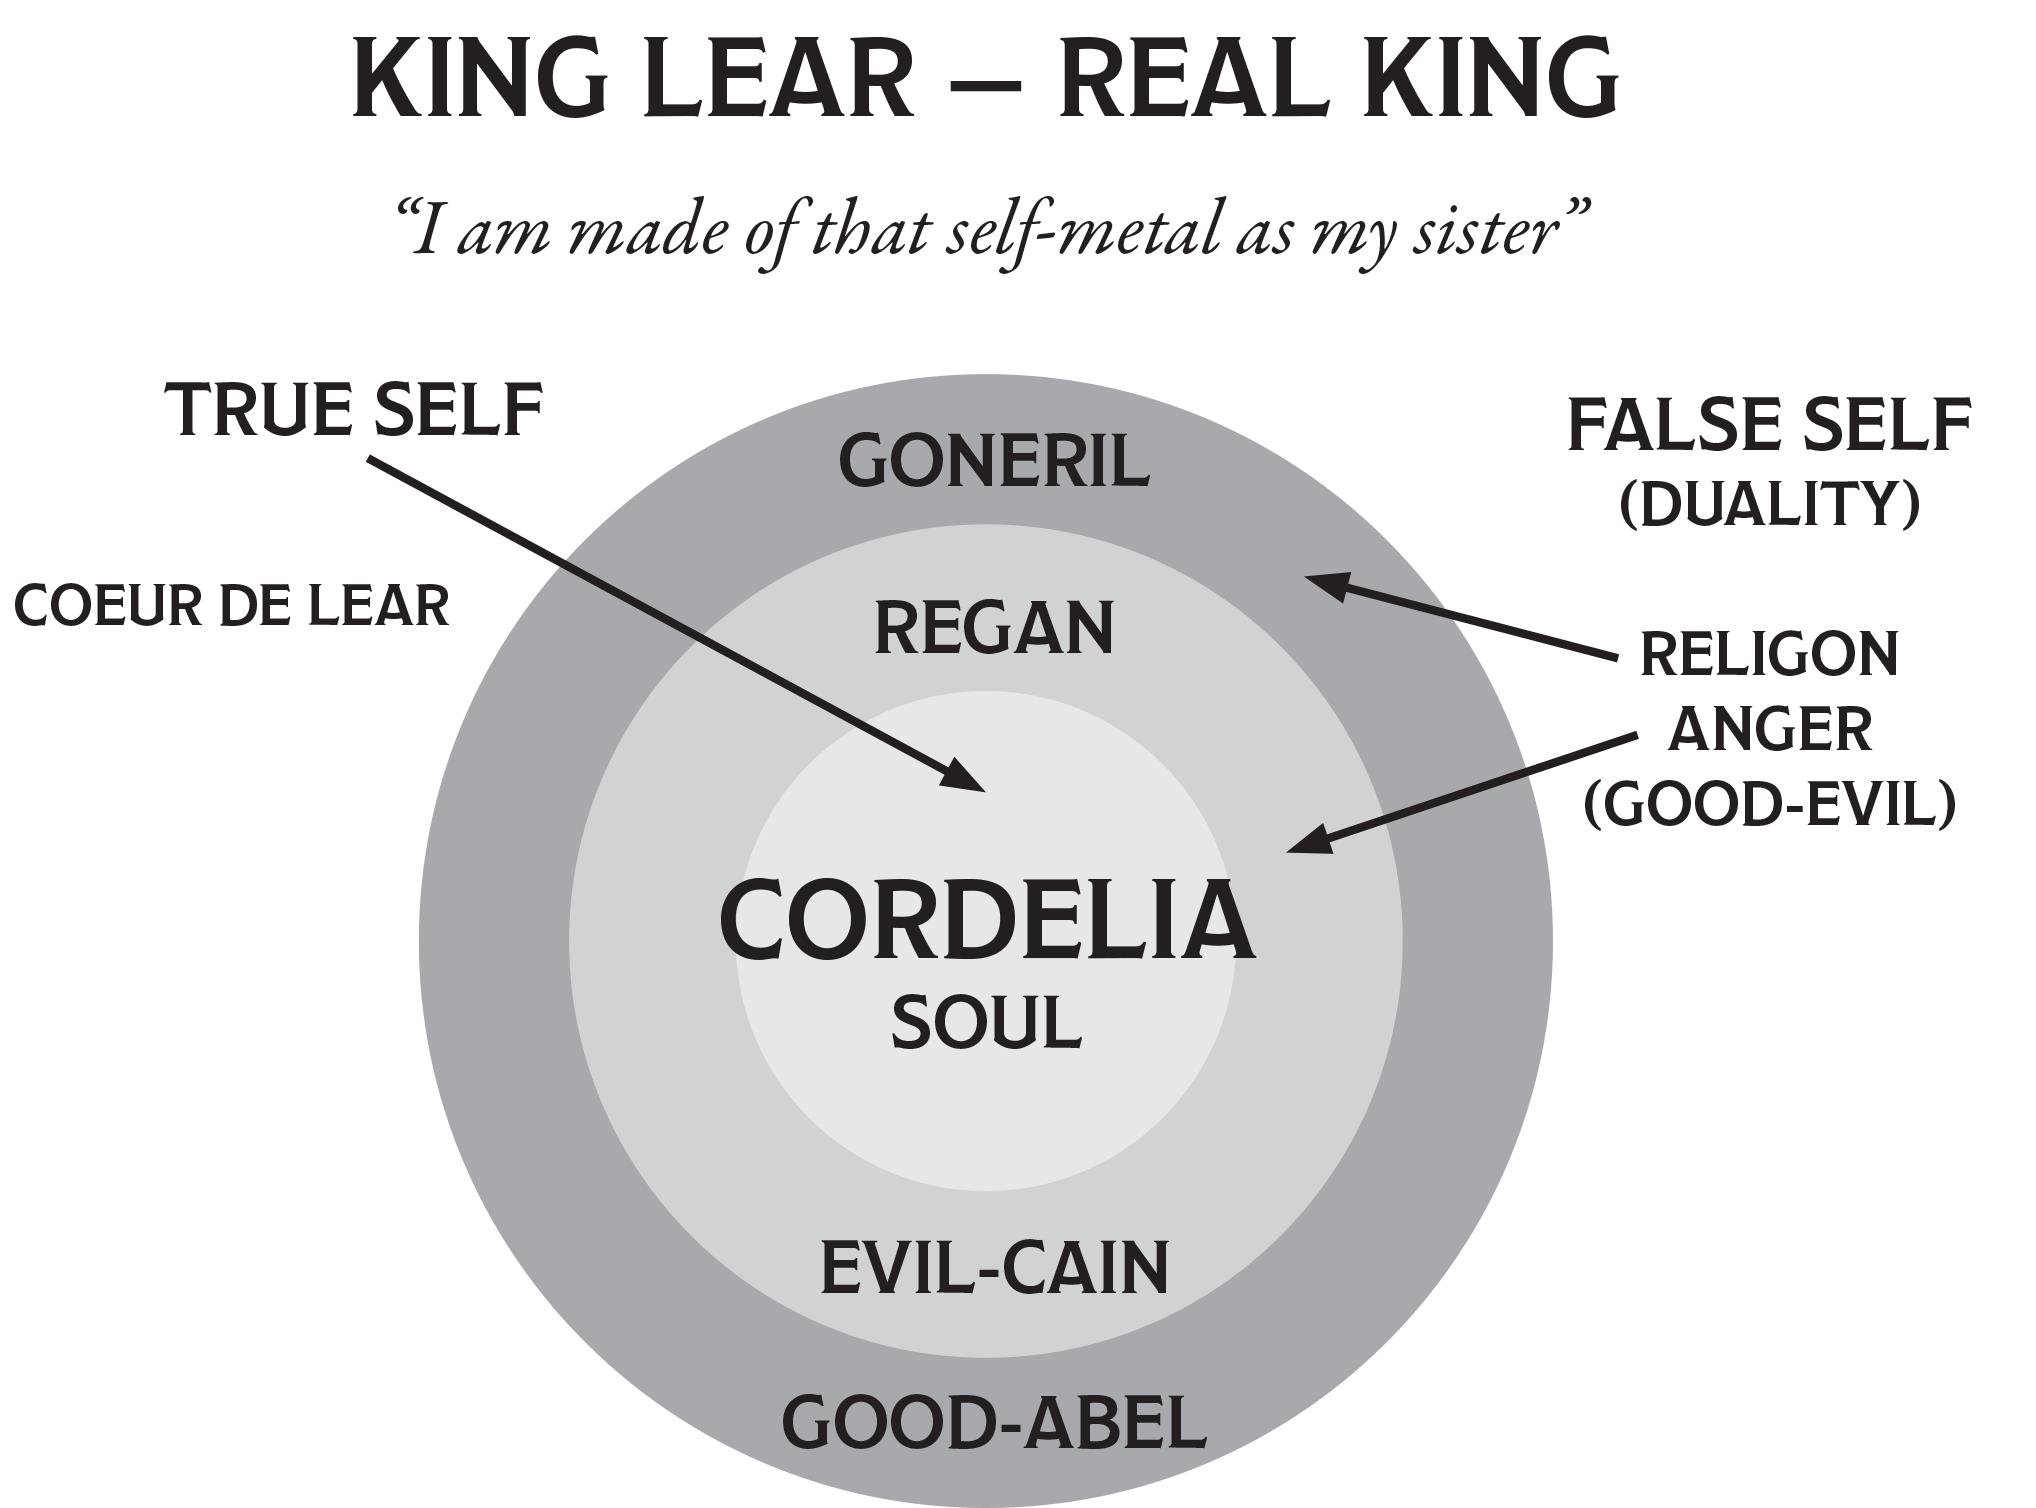 king lear real king graphic paul hunting shakespeares holy grail | Paul ...